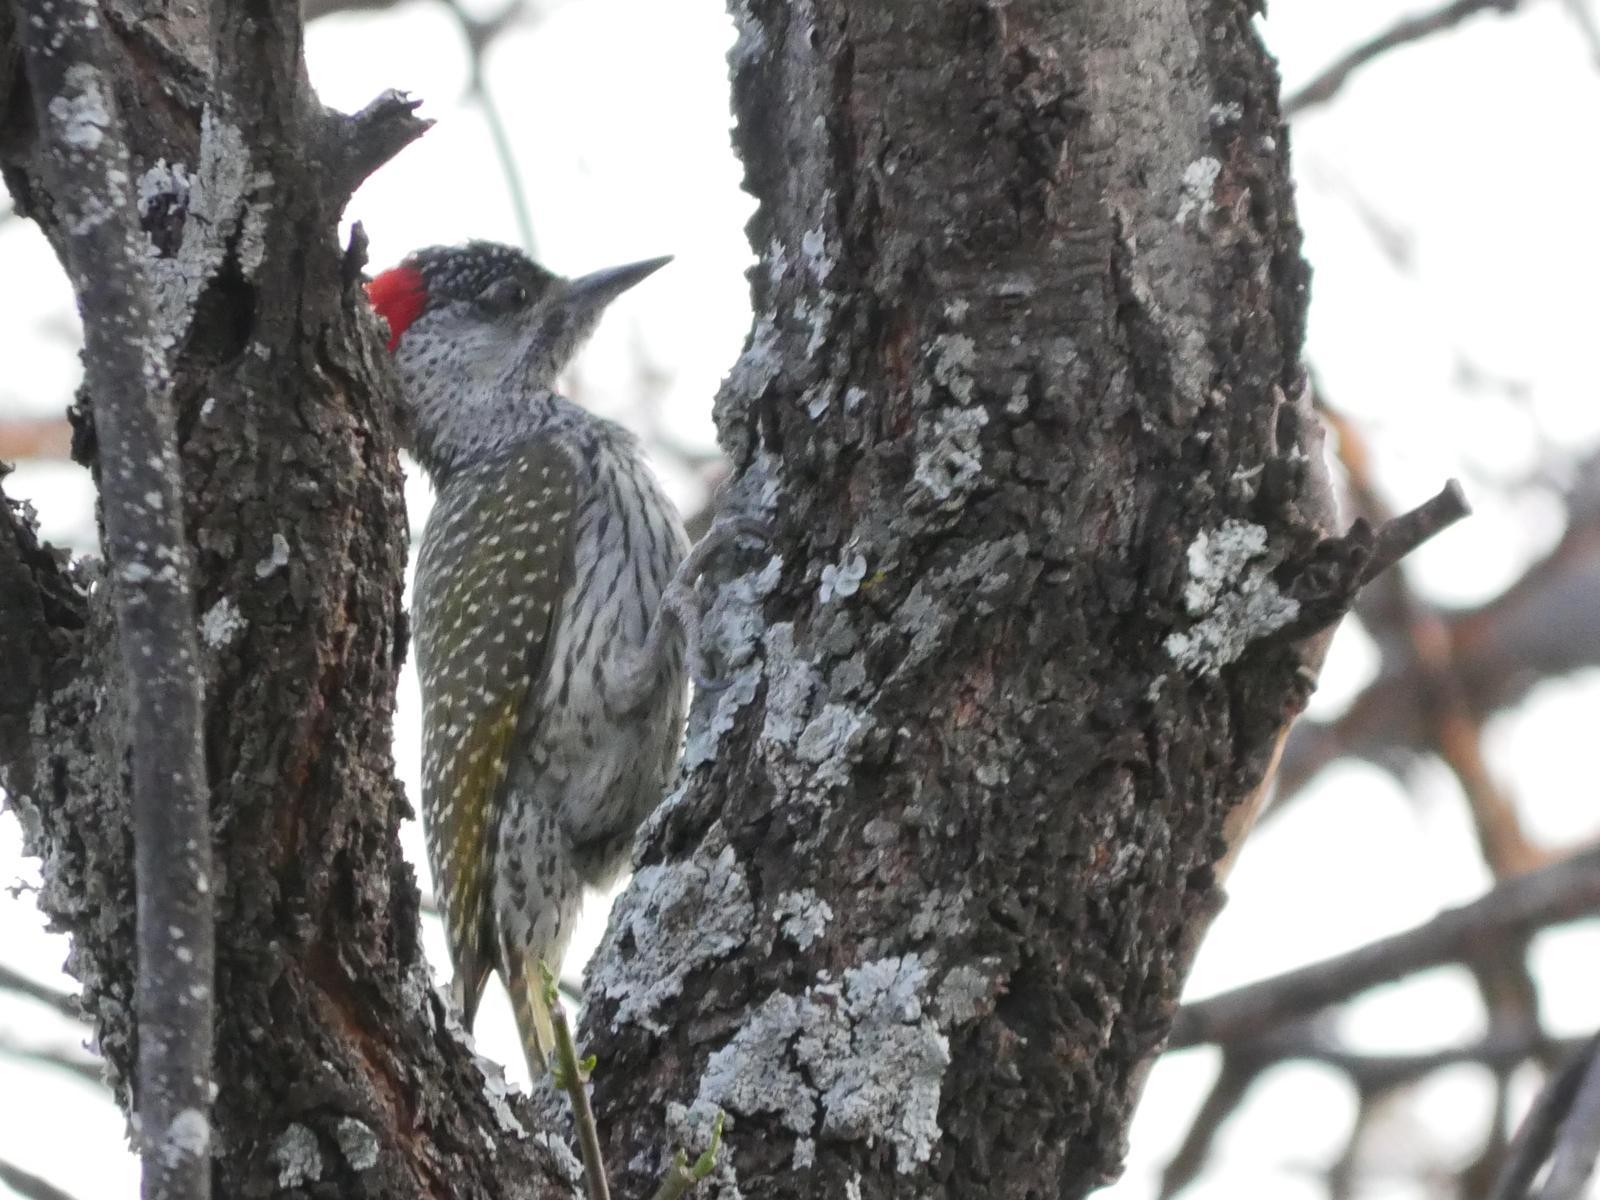 Golden-tailed Woodpecker Photo by Peter Lowe